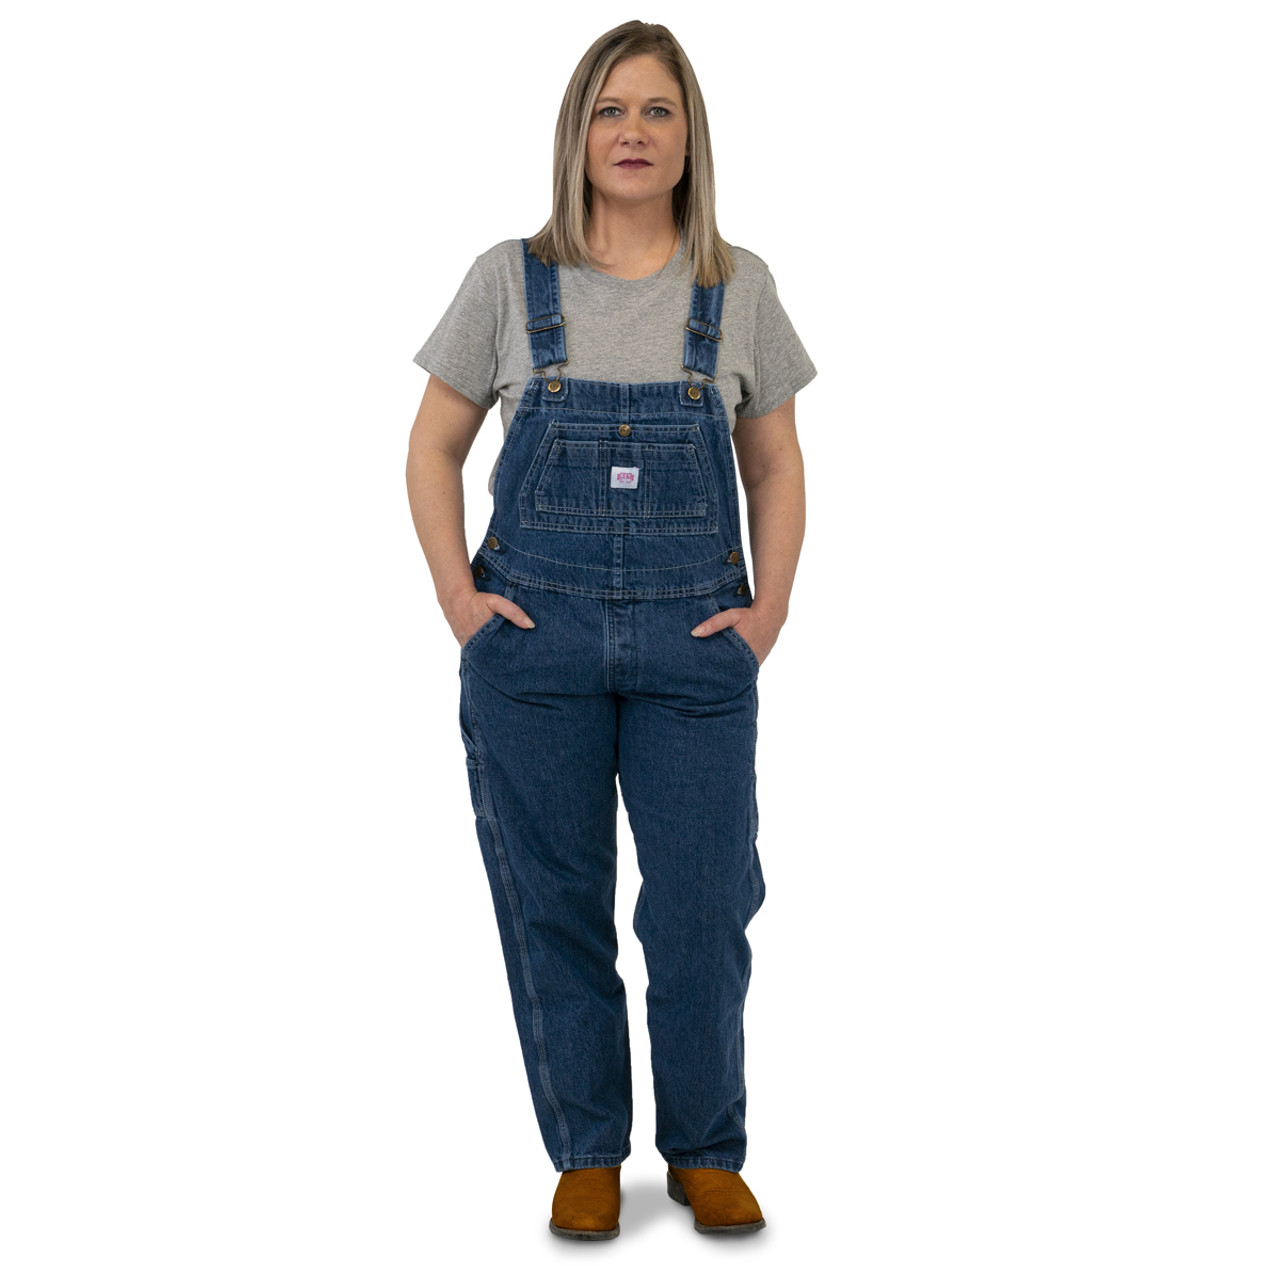 Women's Overalls for the Office